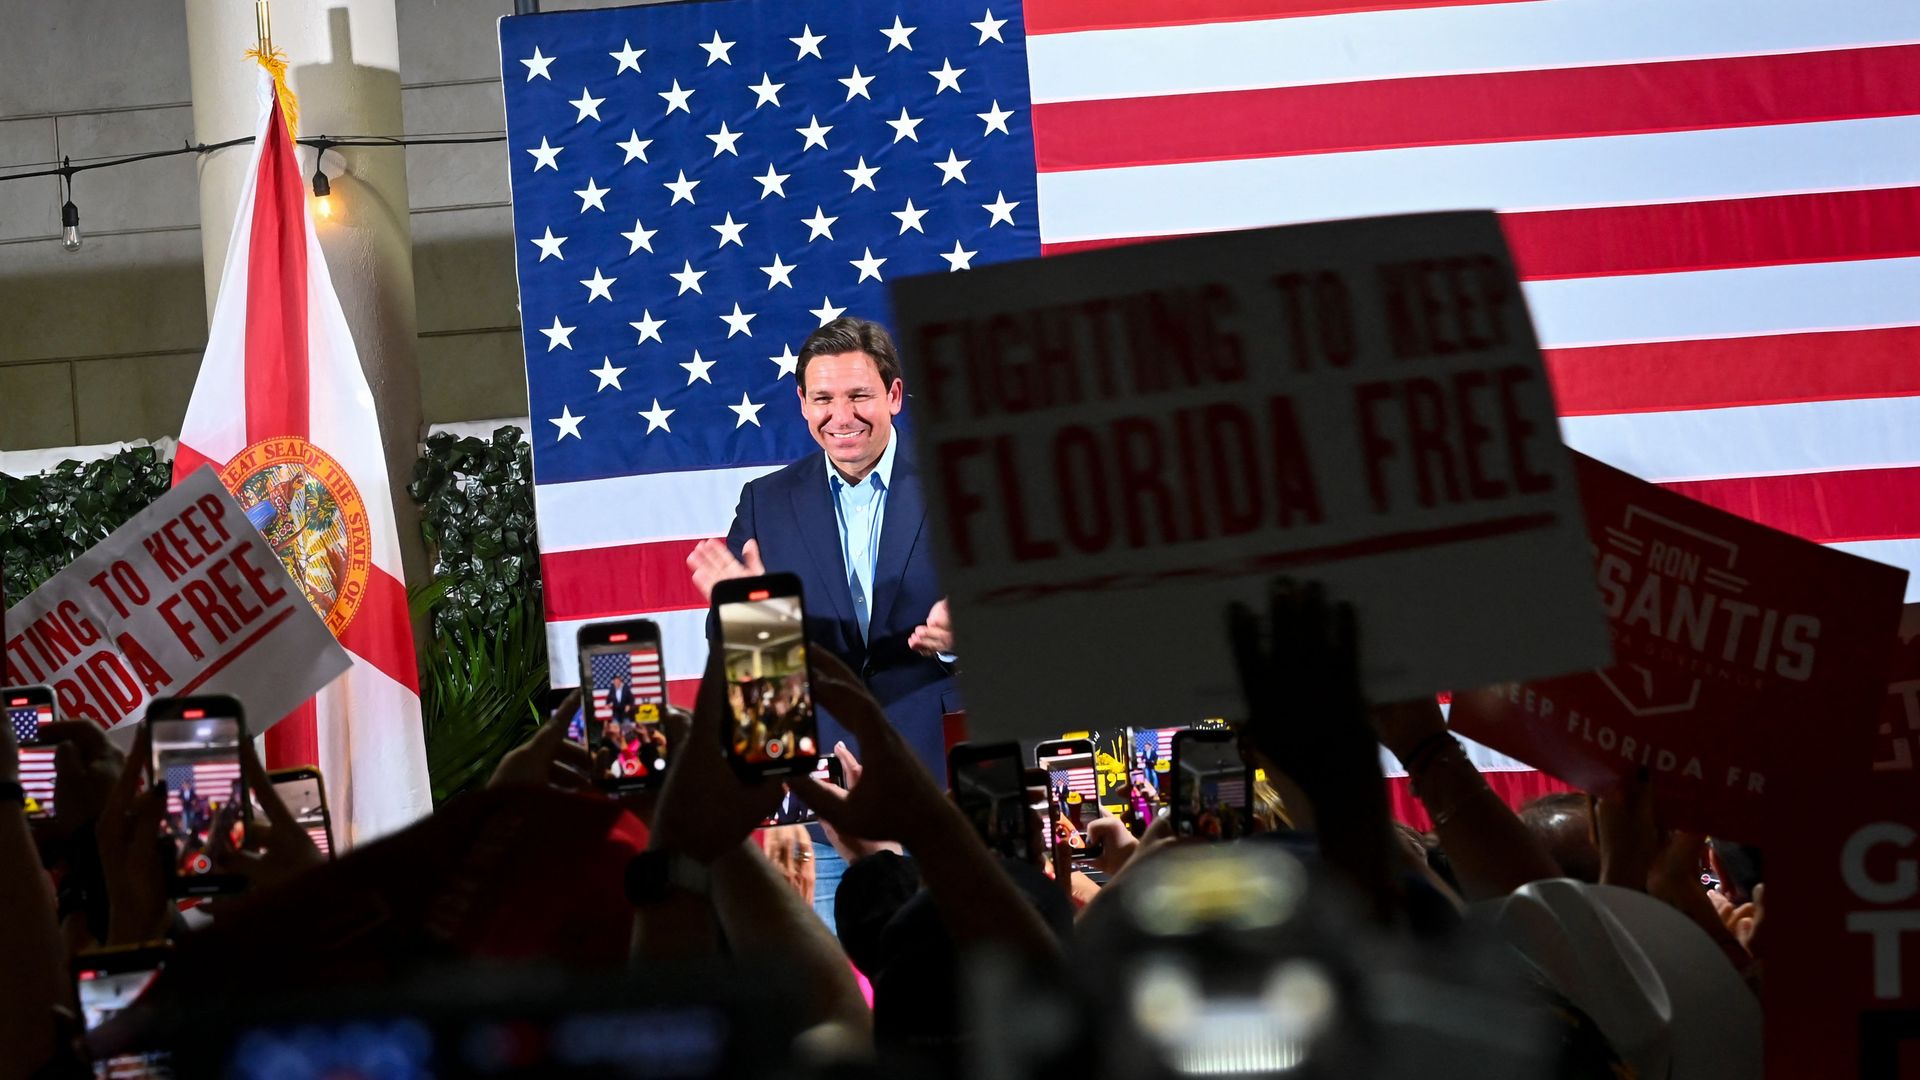 Florida Gov. Ron DeSantis smiles as a crowd of supporters cheers for him.